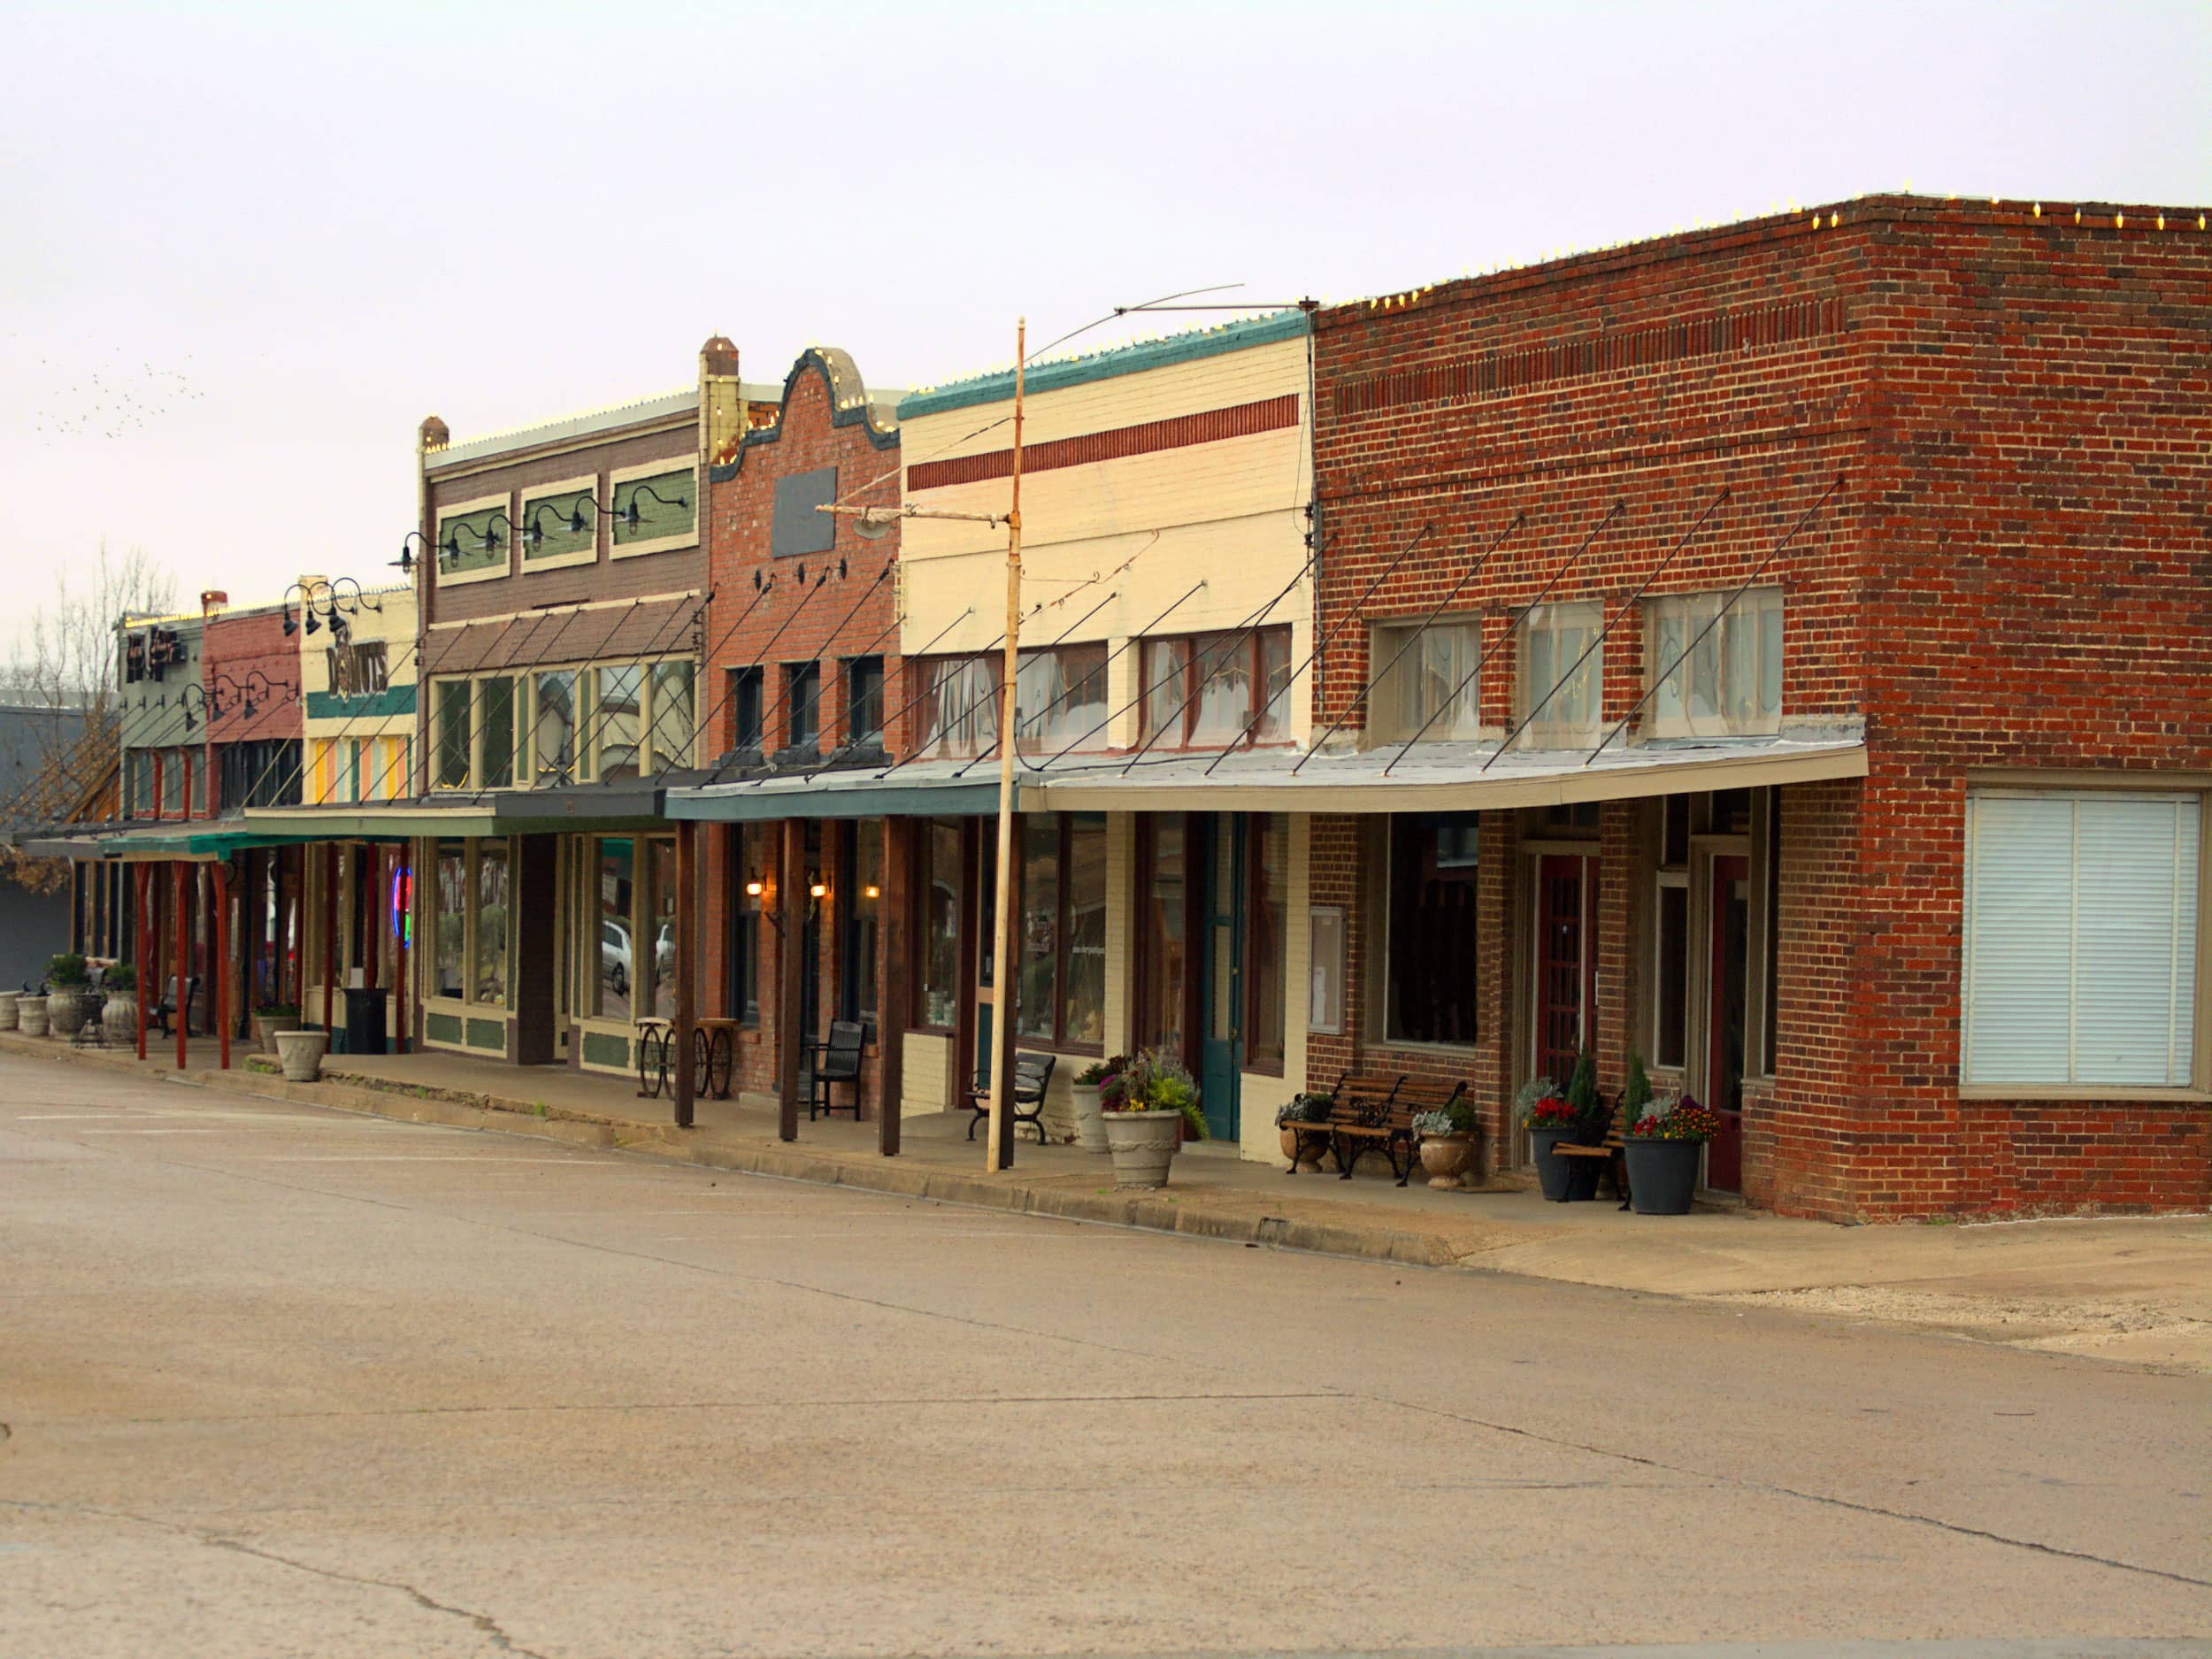 Small old town Fayetteville, Texas